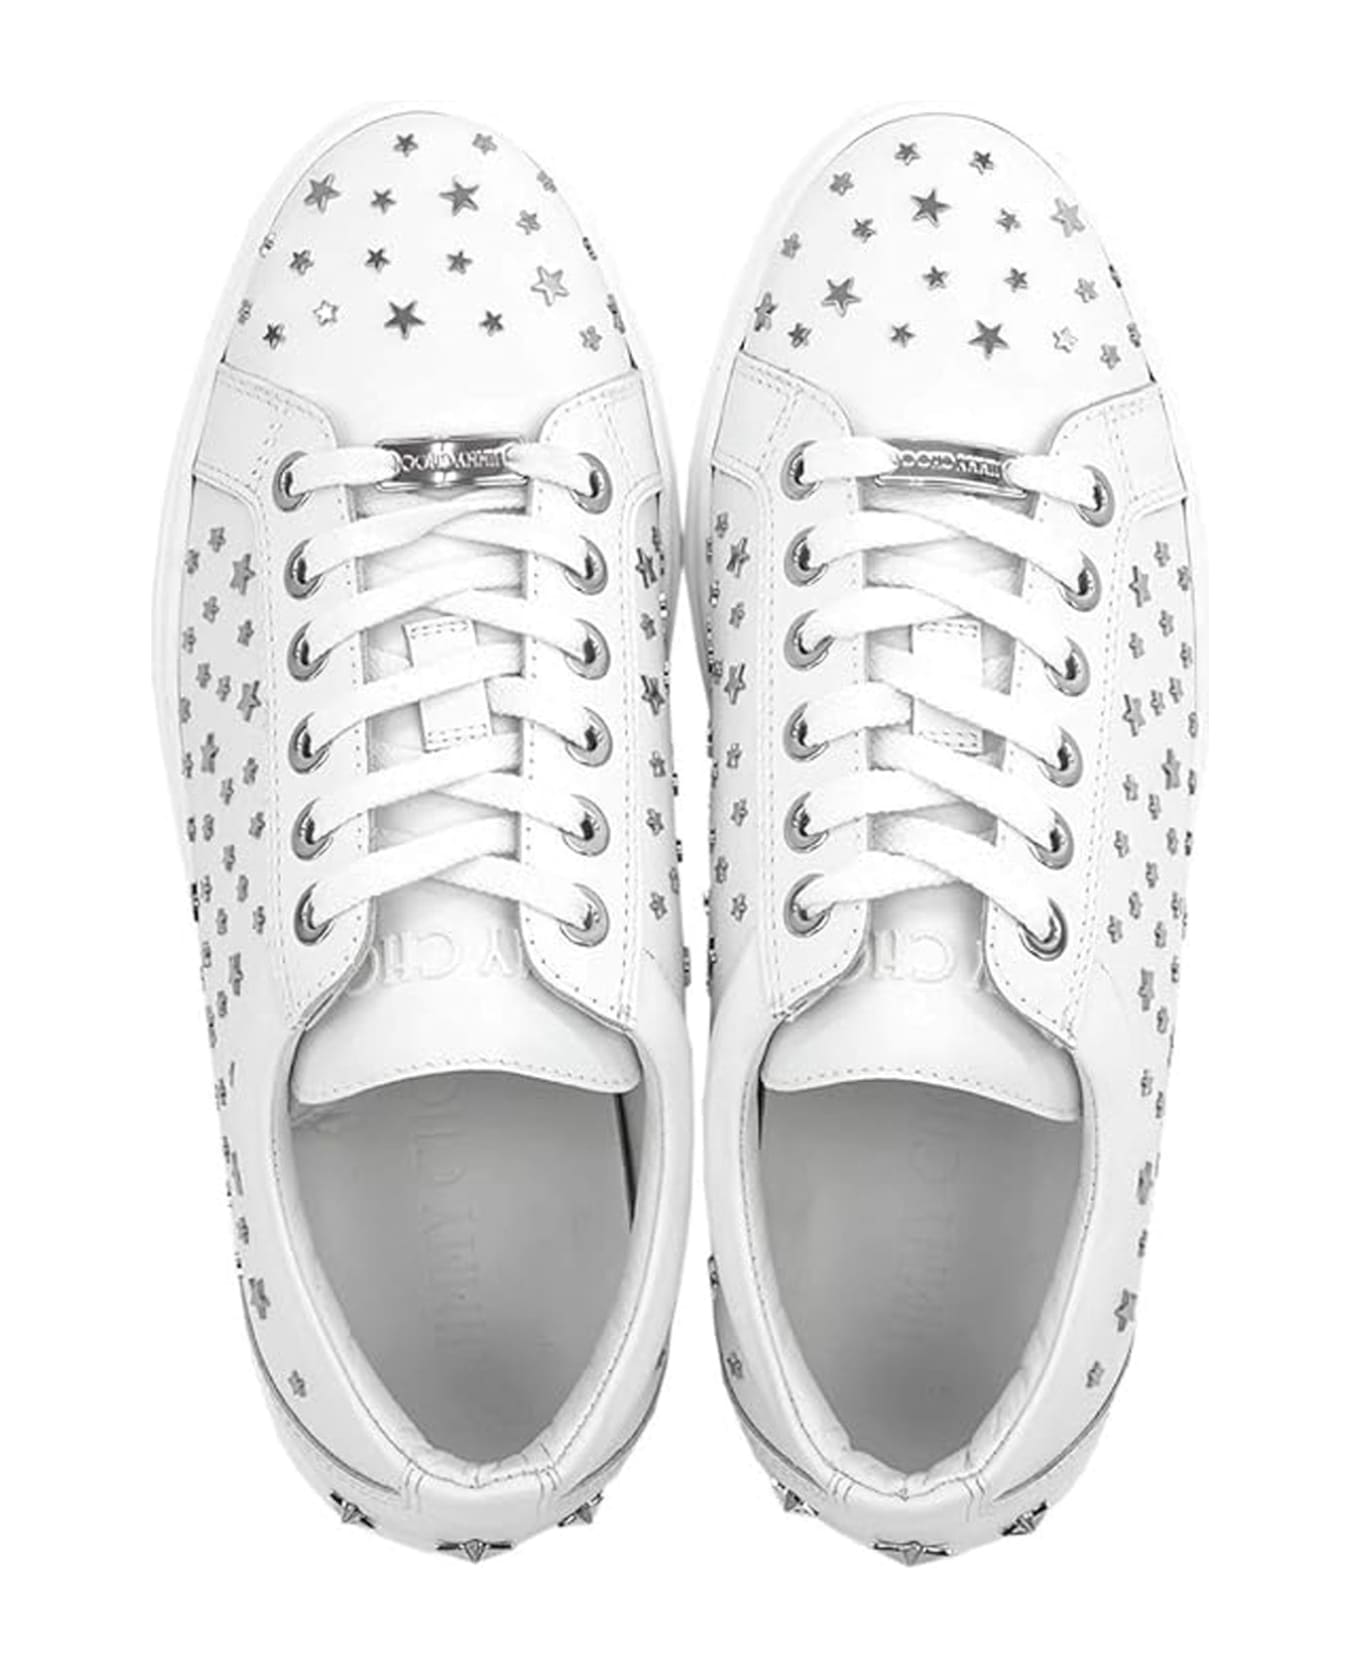 Jimmy Choo Cash Star Leather Sneakers - White スニーカー